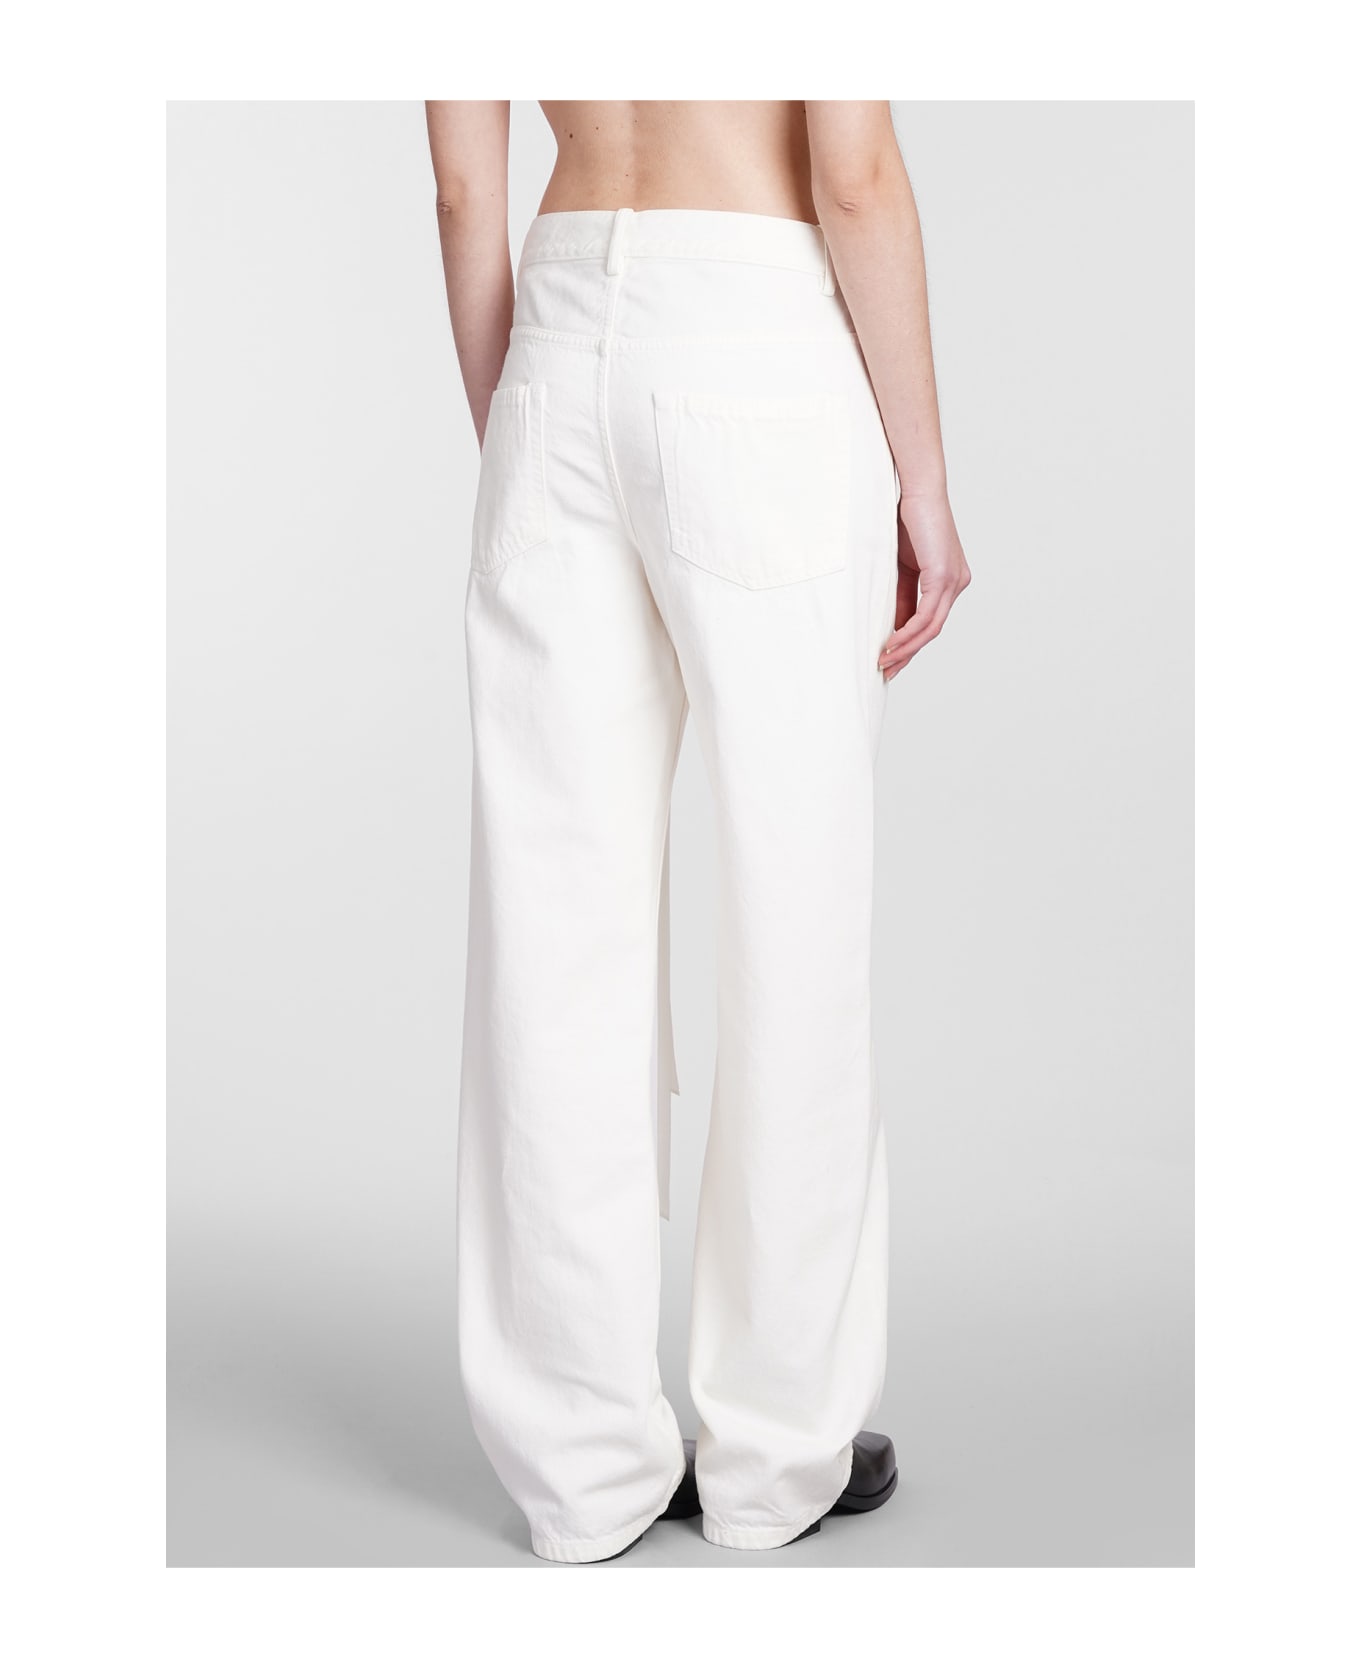 Ann Demeulemeester Jeans In White Cotton - white ボトムス